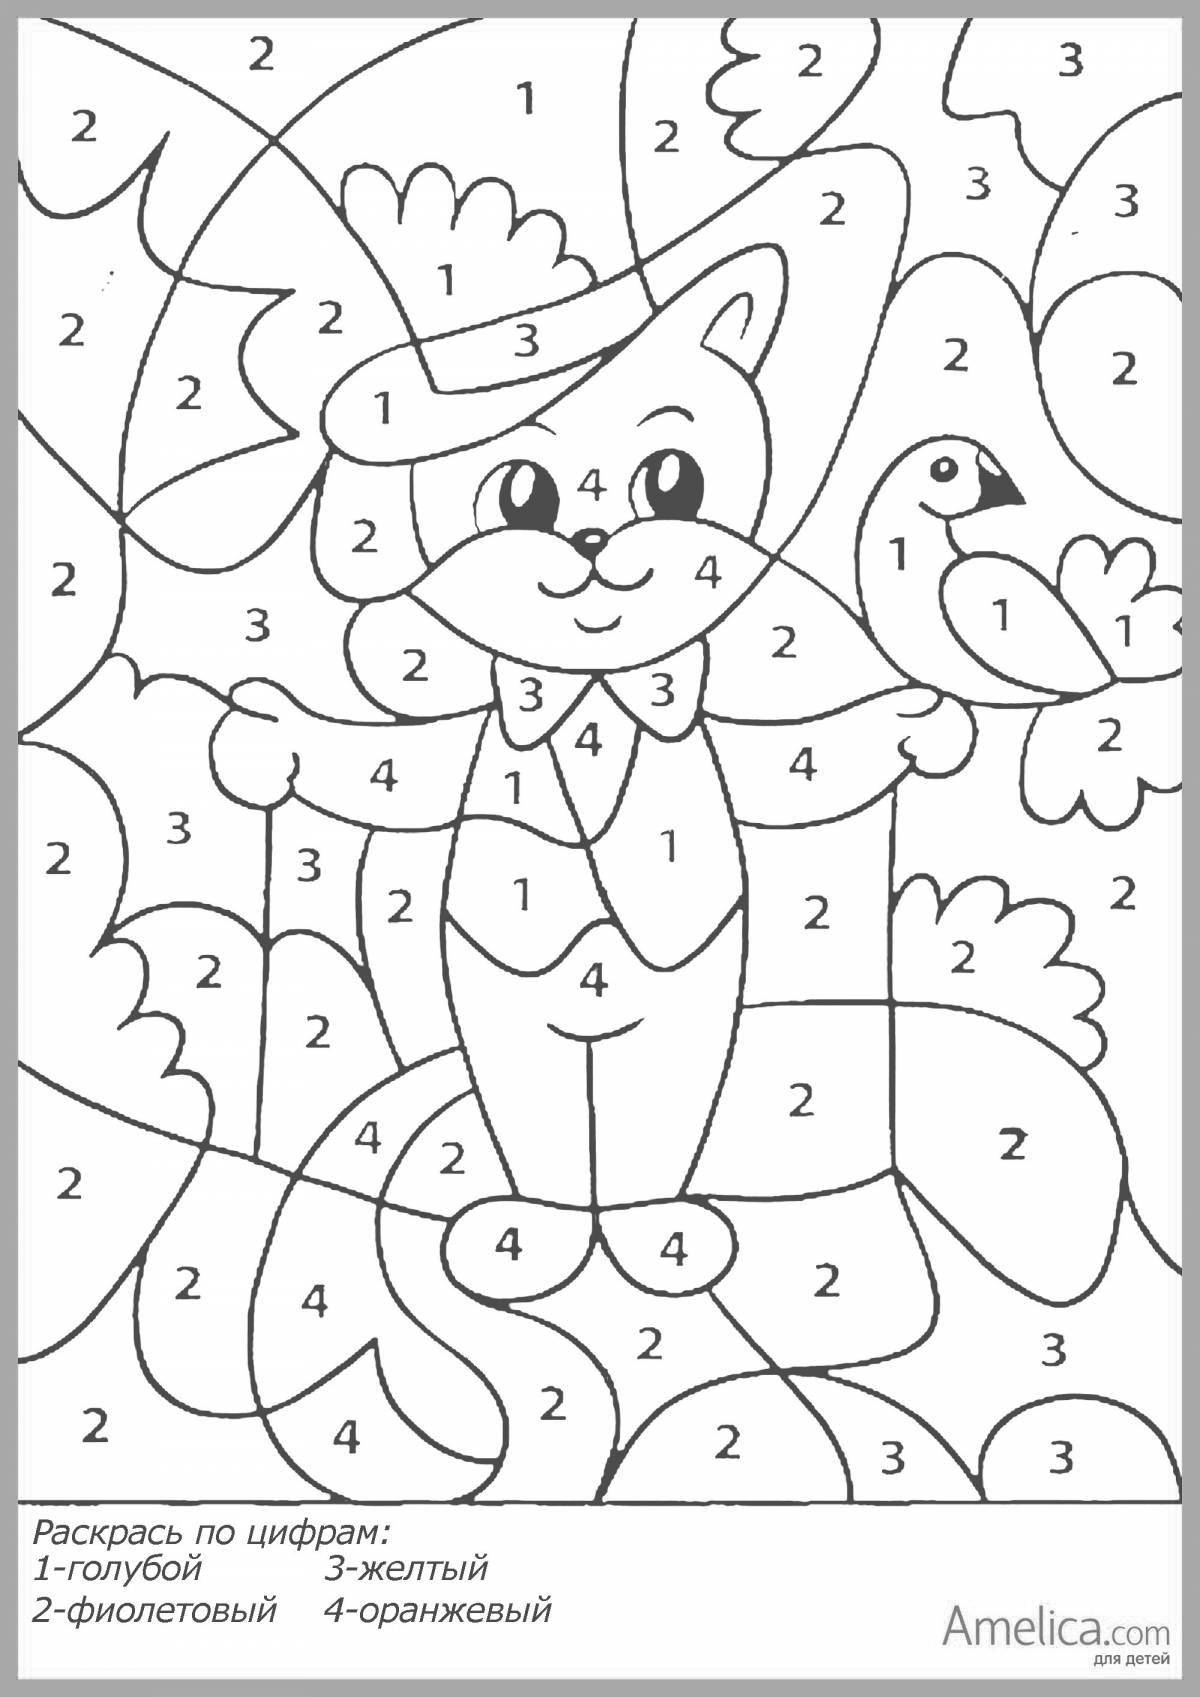 Fun coloring by numbers by photo